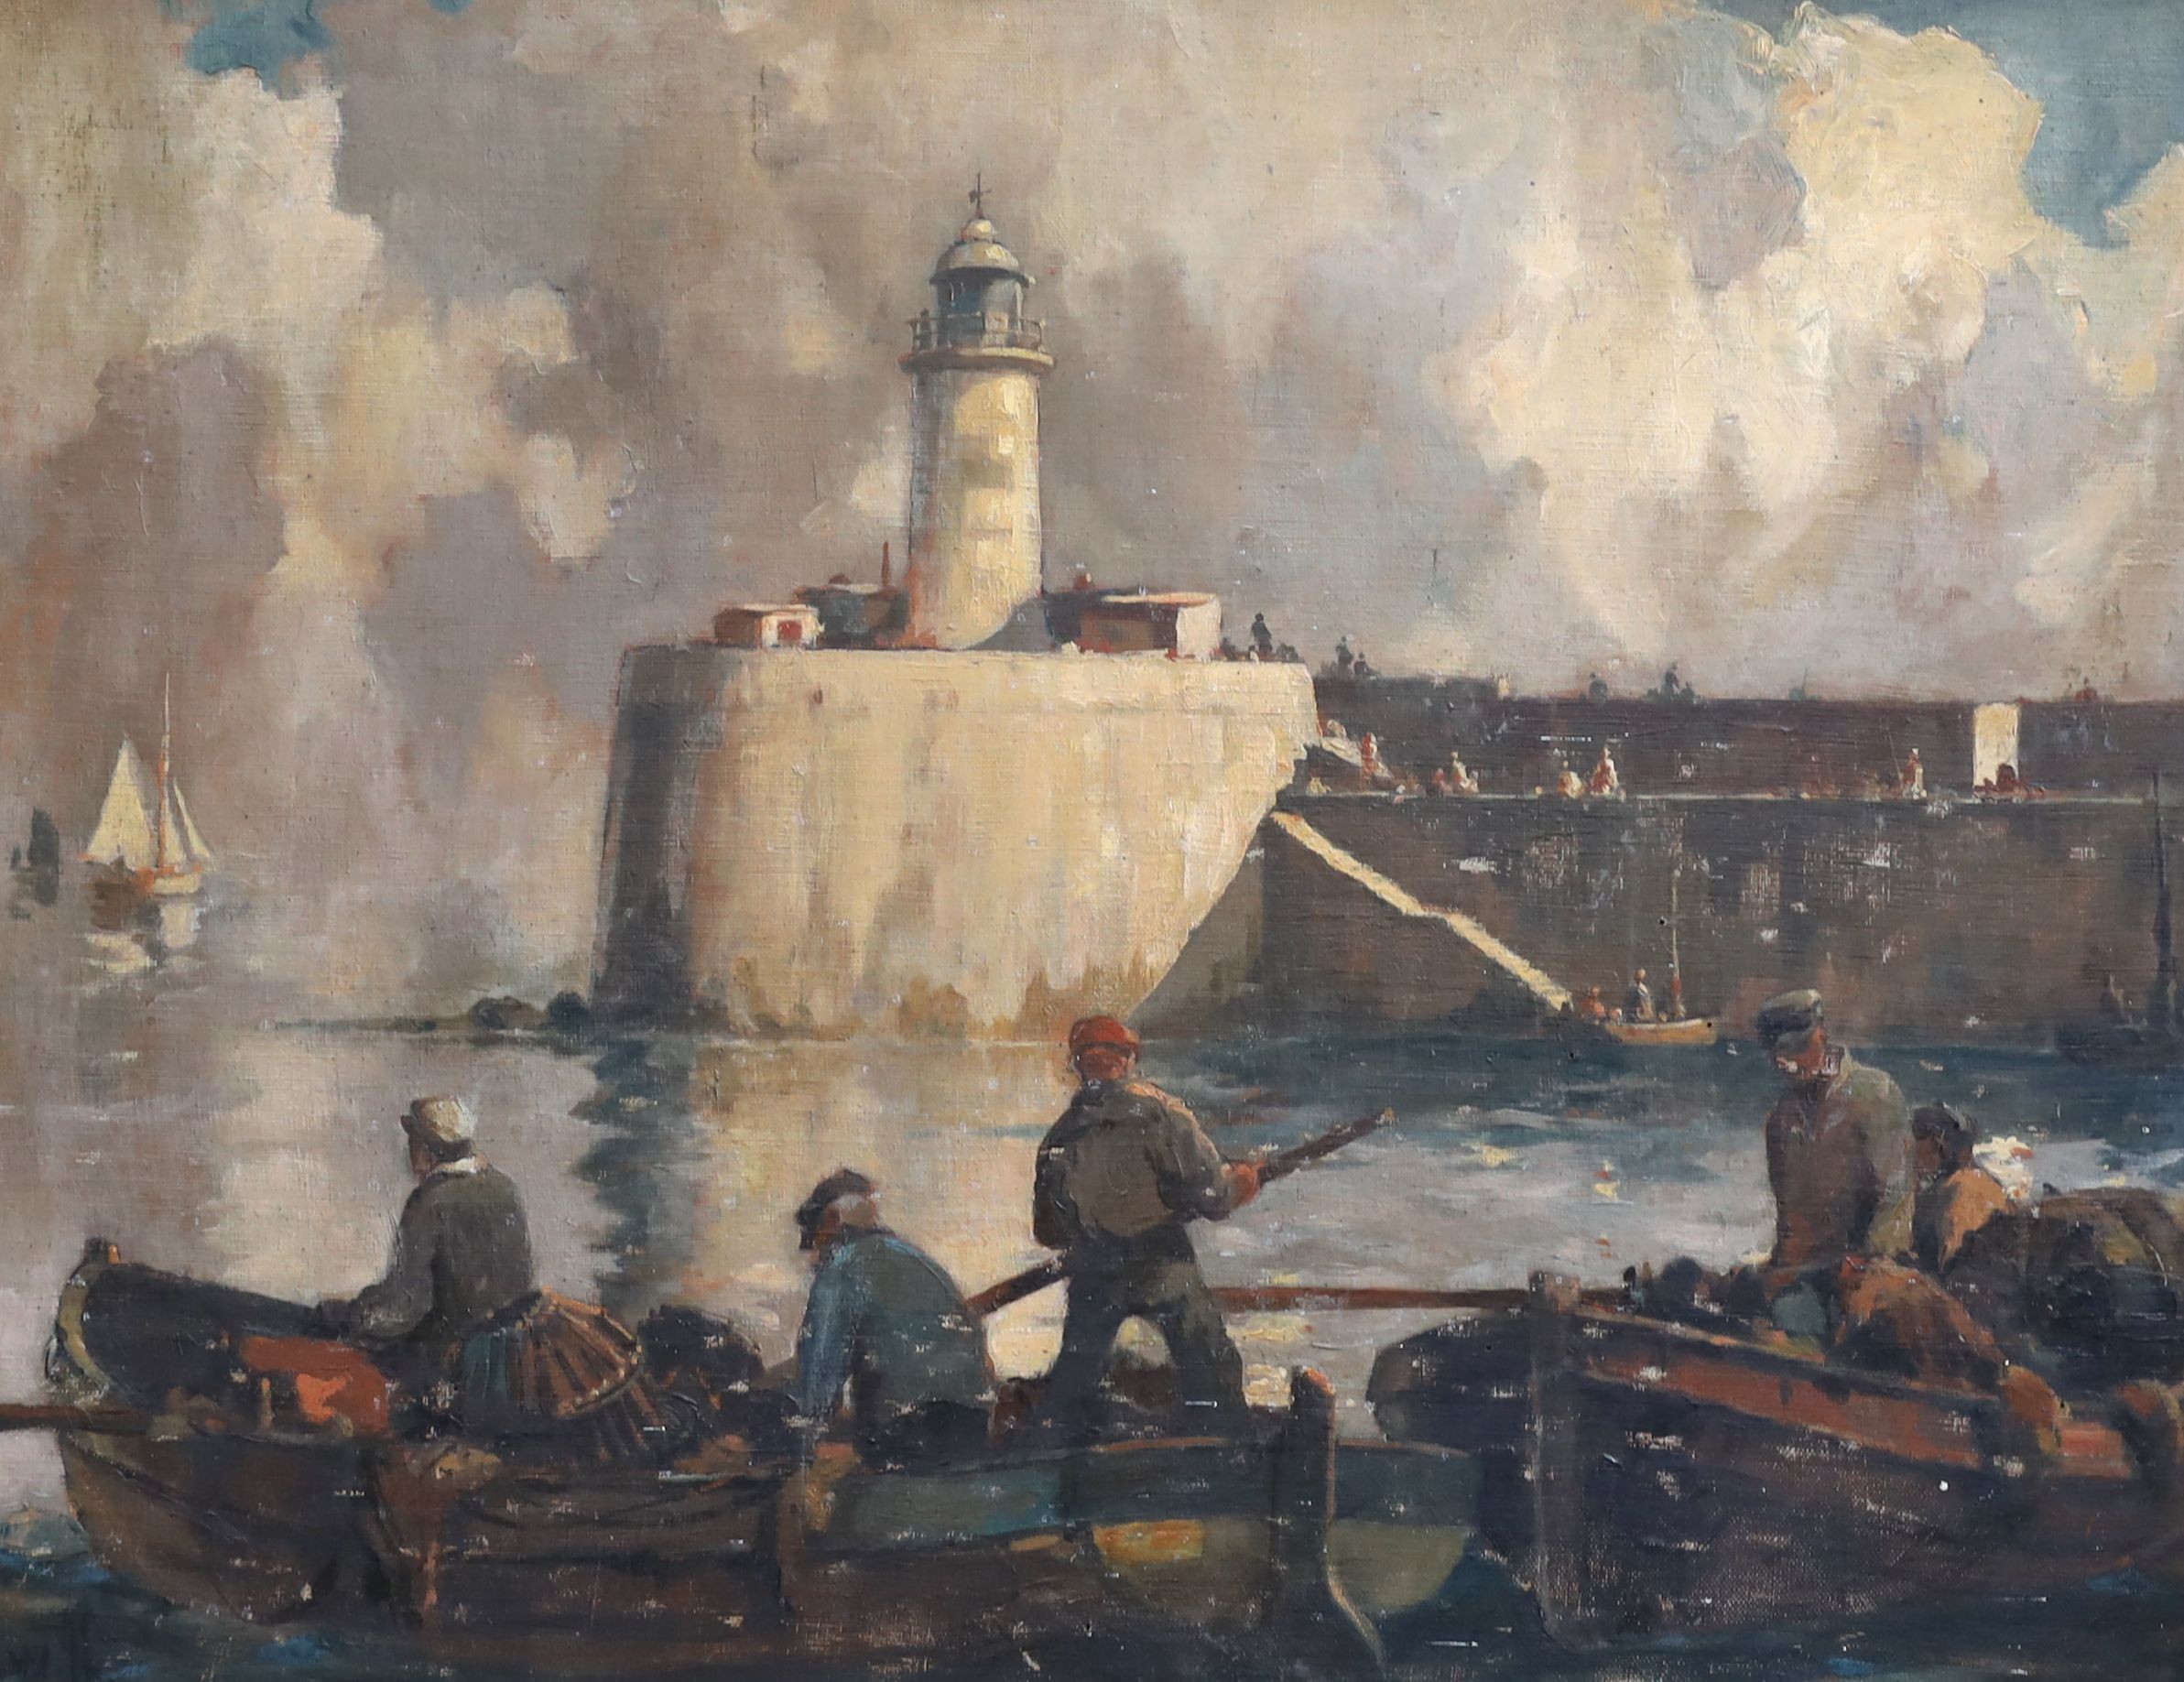 William Hyams (1878-1952), 'The Lighthouse, Newhaven', oil on canvas laid on board, 54 x 69cm